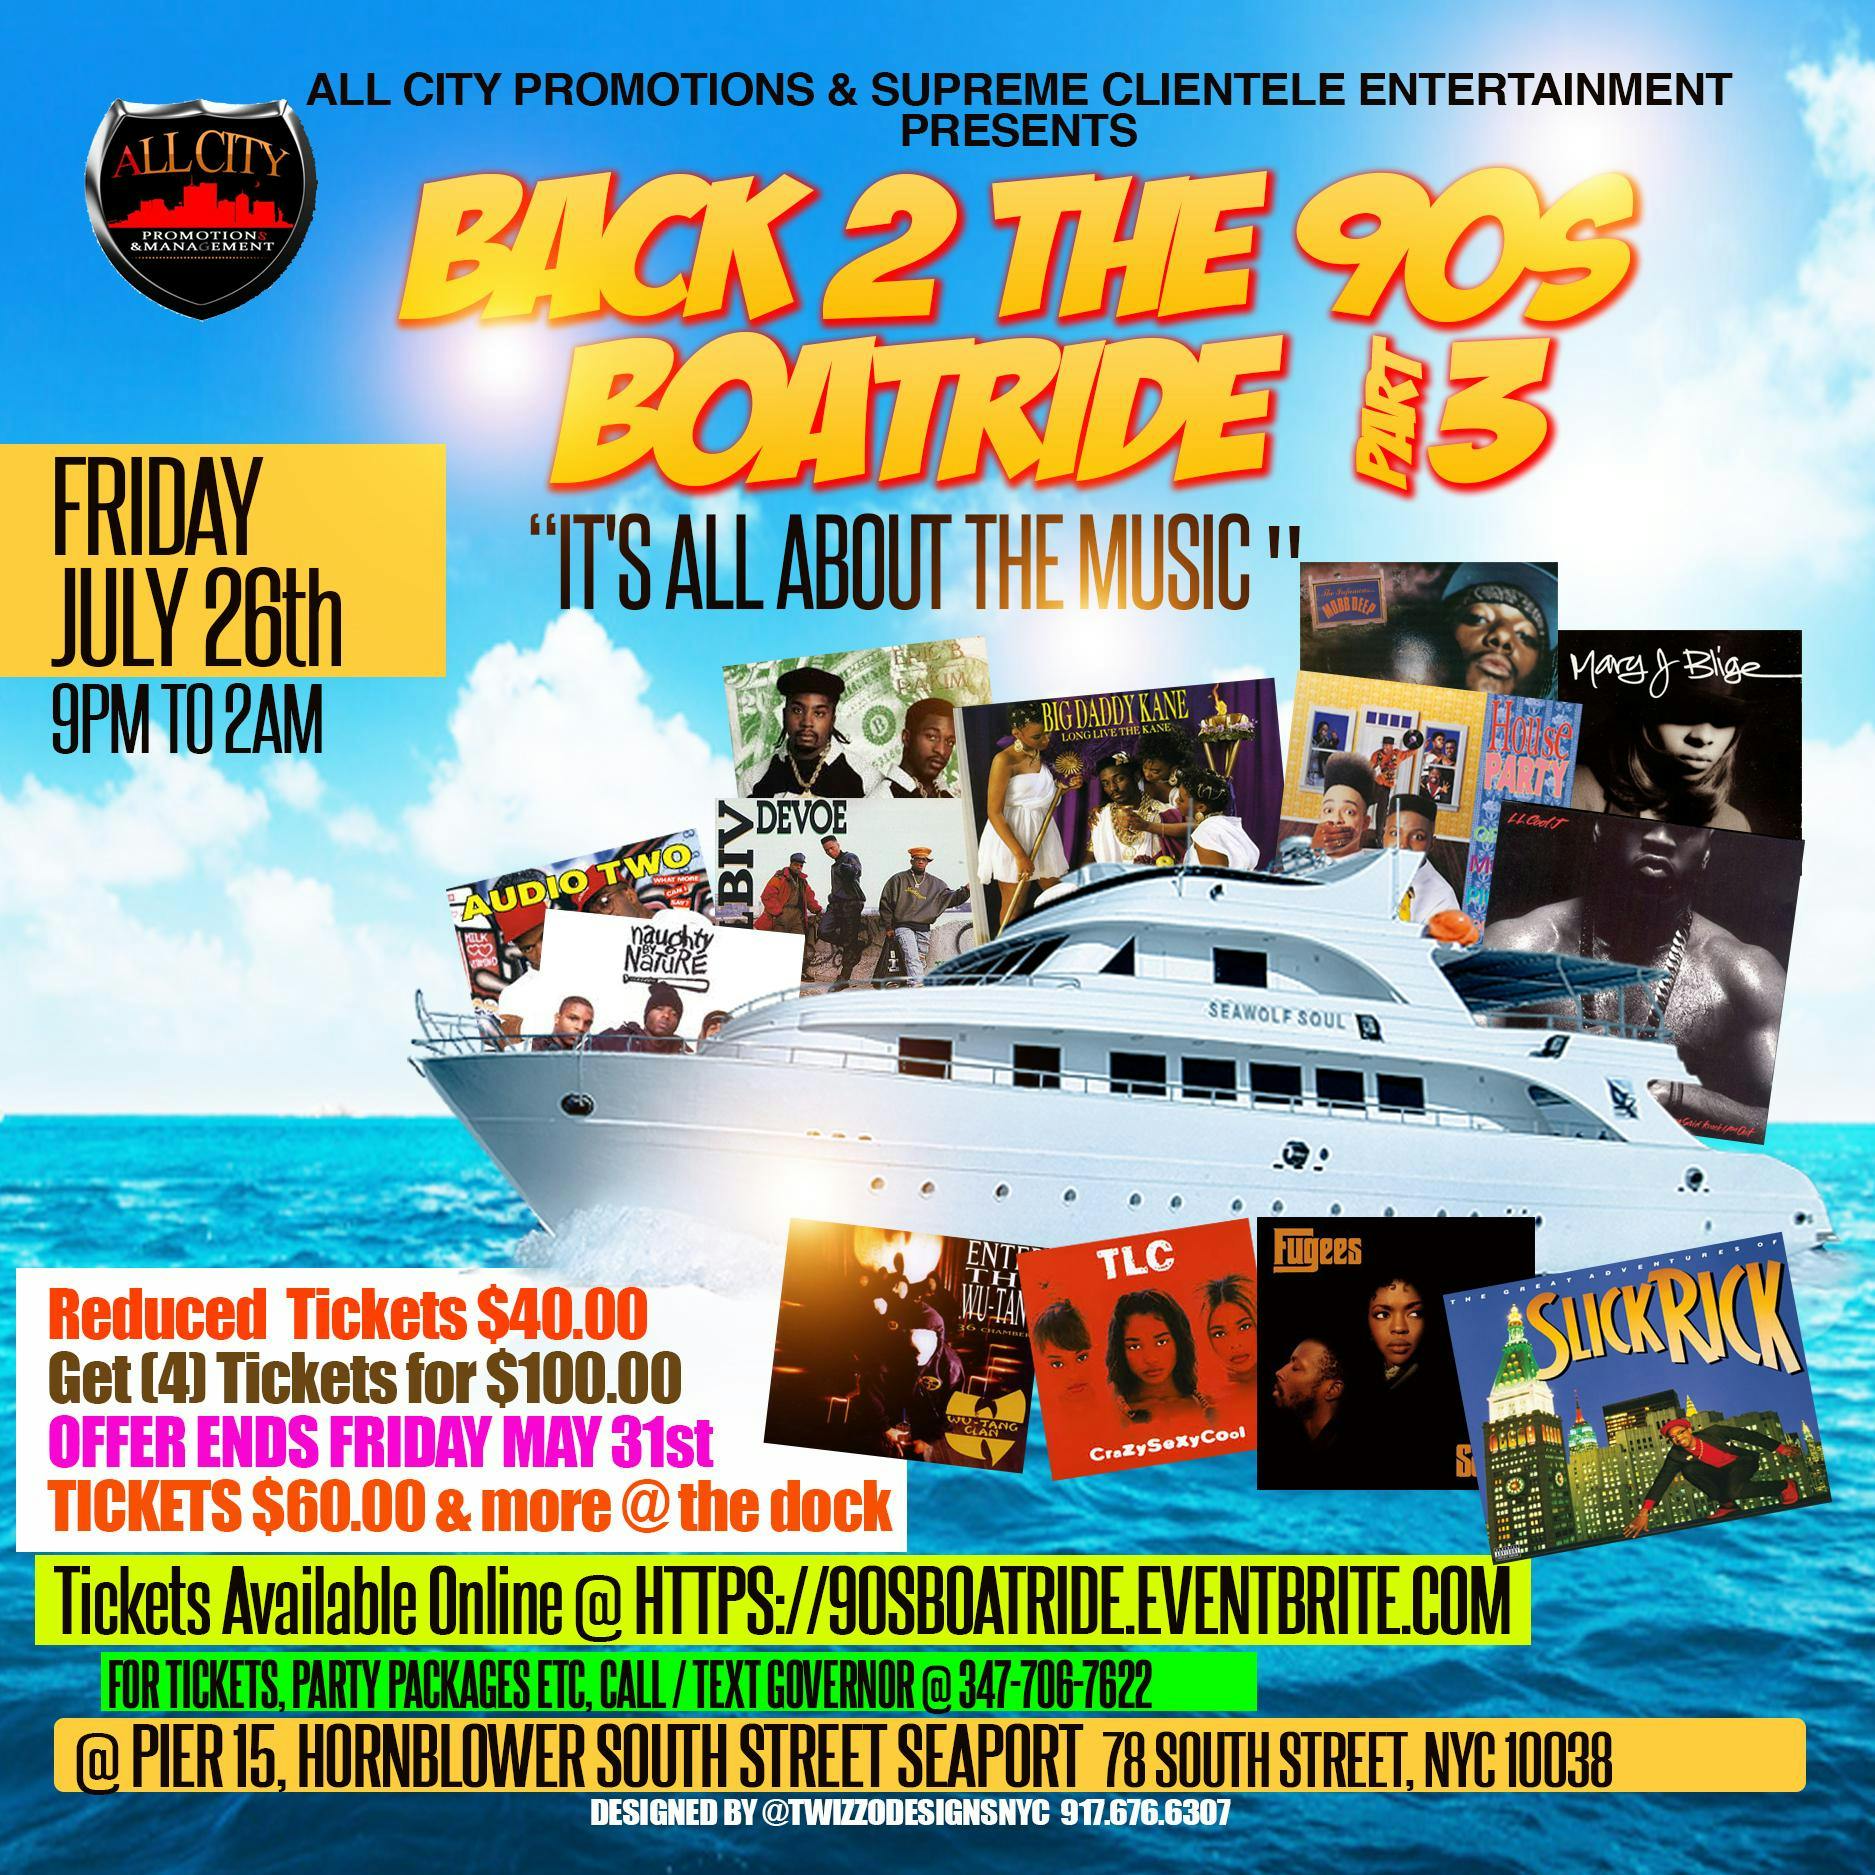 BACK TO THE 90's BOAT RIDE PT3, Fri 7/26 @ PIER 15, South St Seaport @ 9pm 